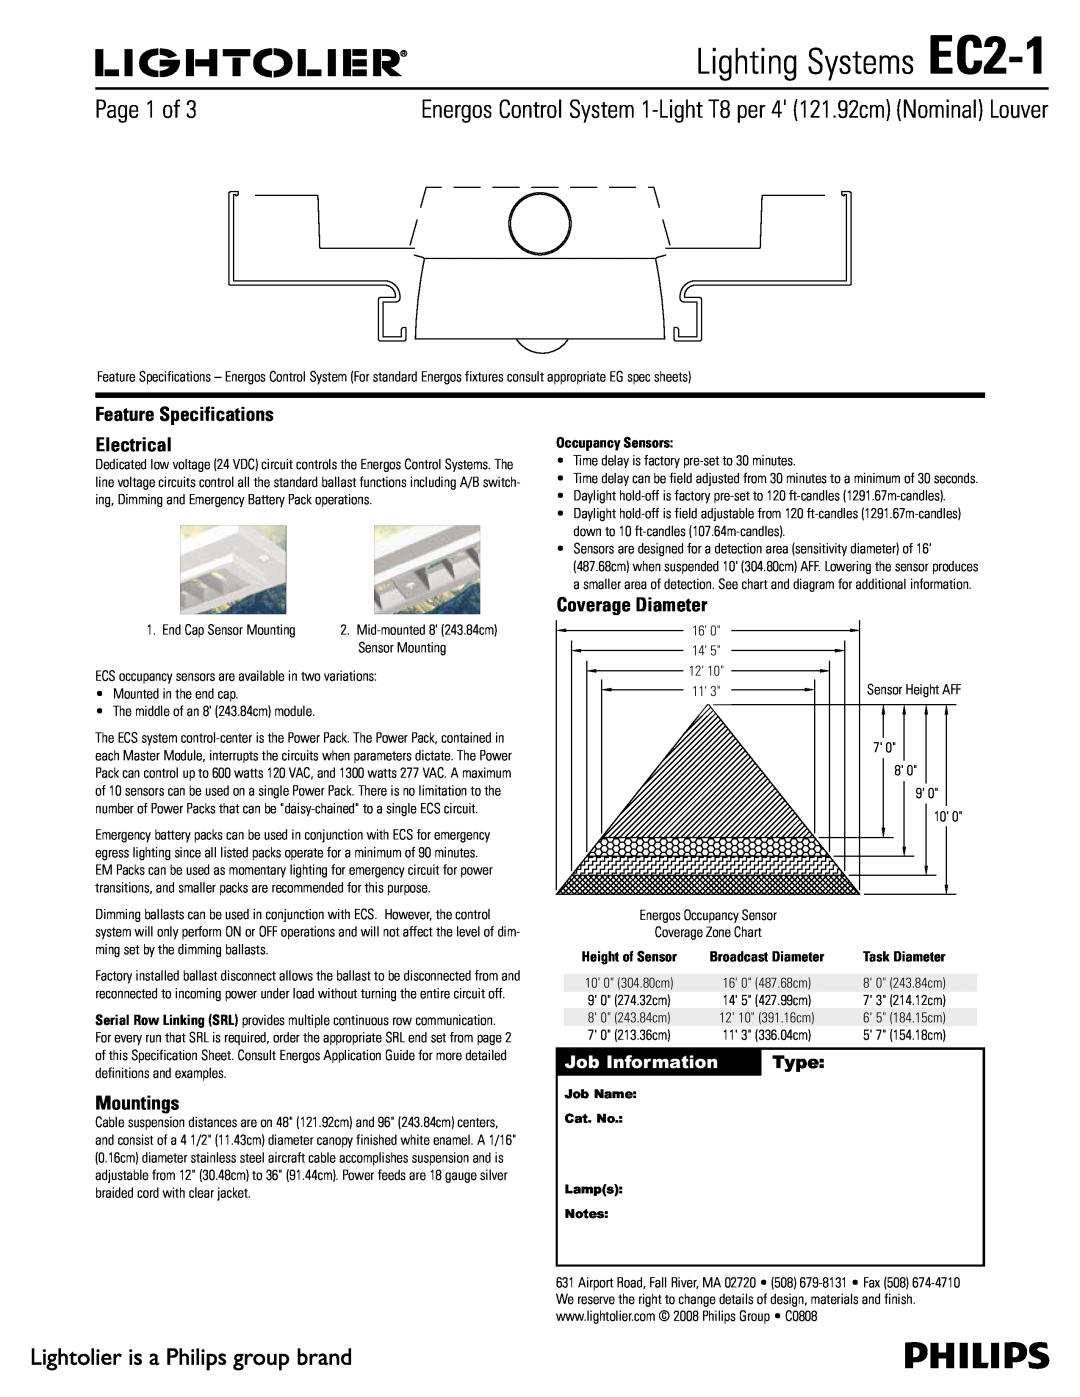 Lightolier specifications Lighting Systems EC2-1, Feature Specifications Electrical, Mountings, Coverage Diameter, Type 